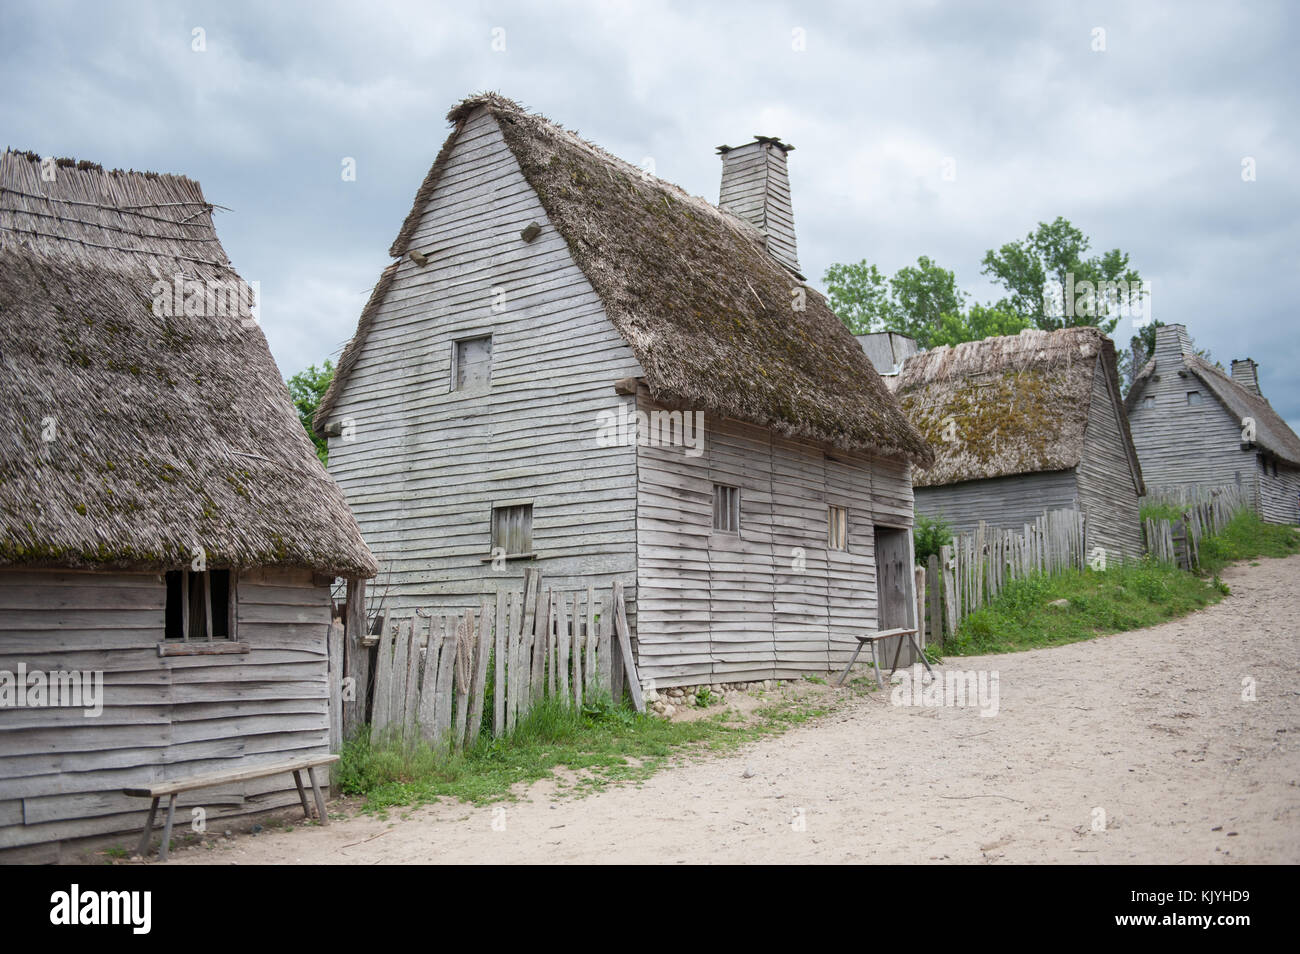 Plimoth Plantation replicates the original settlement of the Pilgrims at Plymouth Colony, where according to myth the first thanksgiving may have been Stock Photo